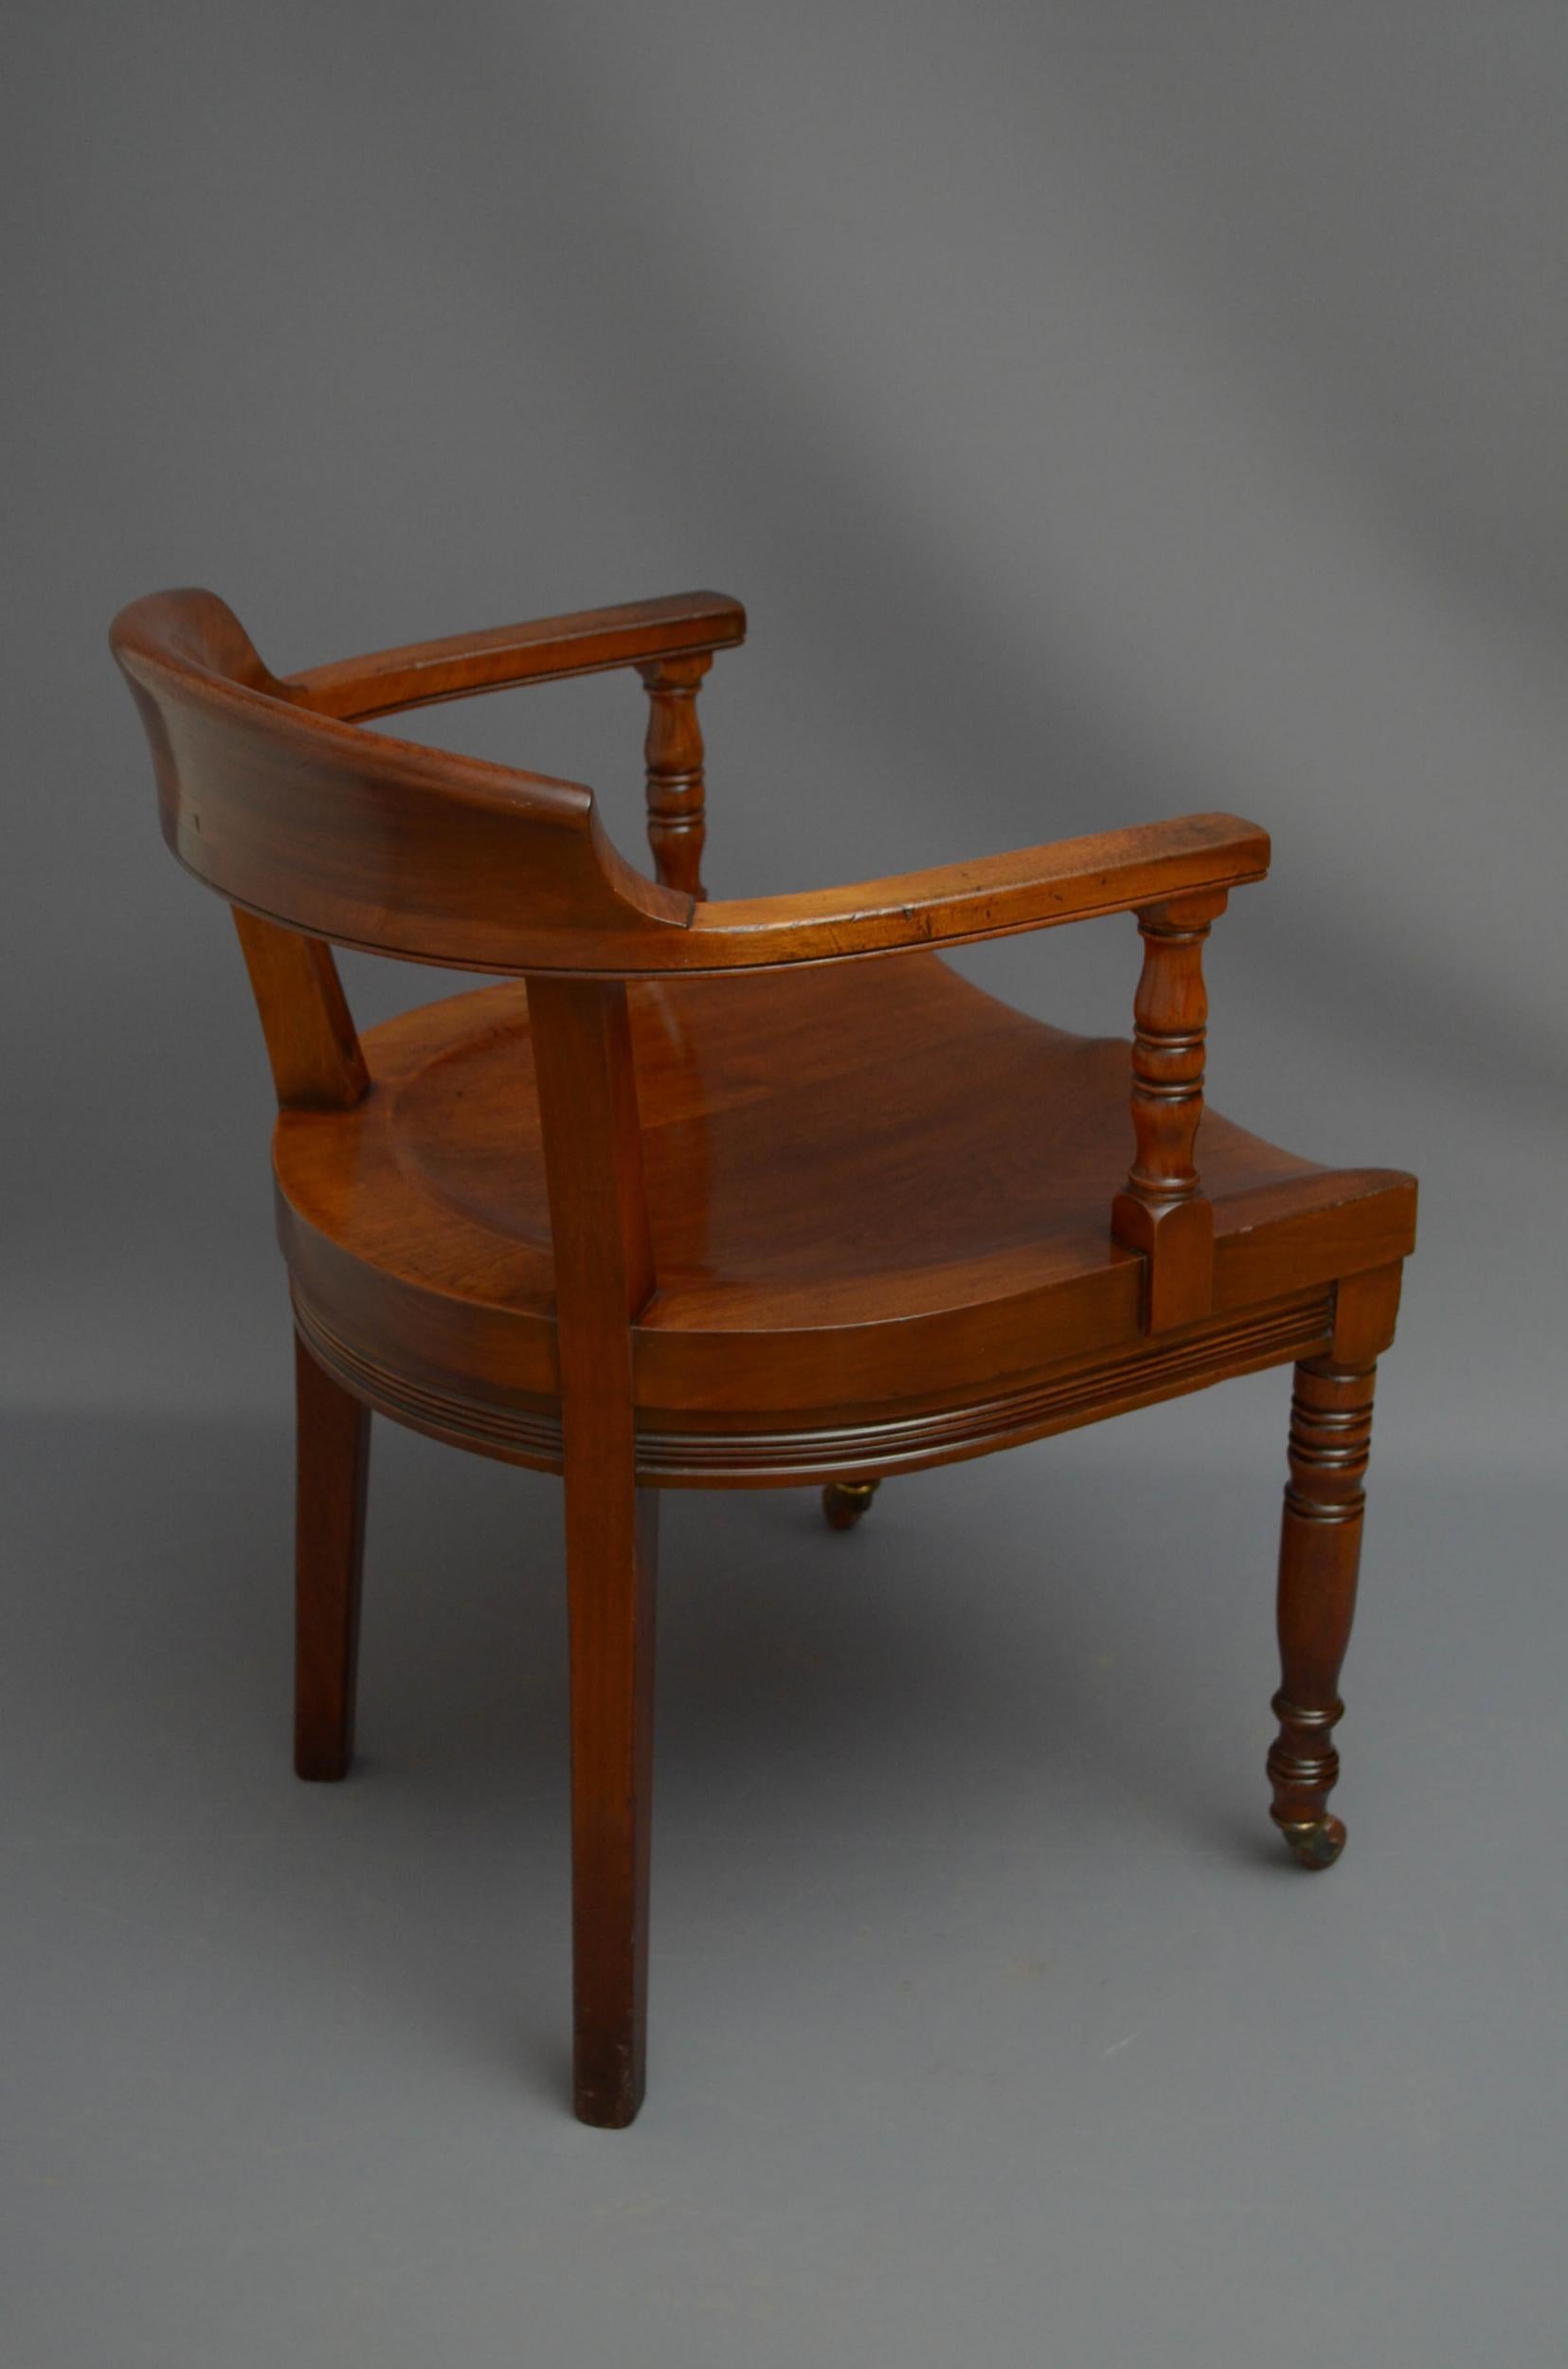 Turner, Son & Walker Late Victorian Desk or Library Chair 7